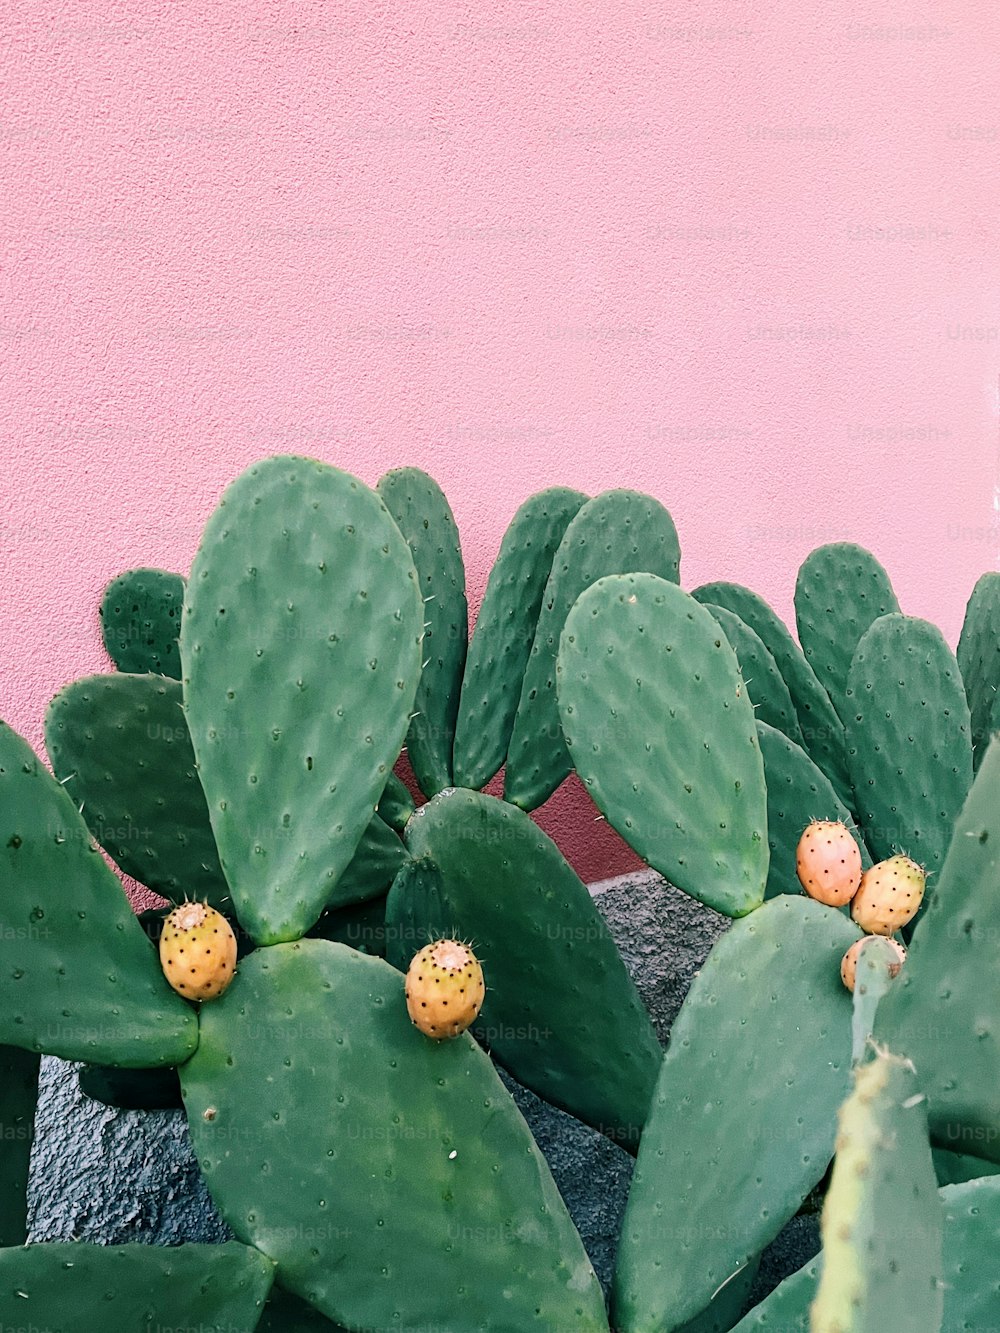 a close up of a cactus plant with a pink wall in the background